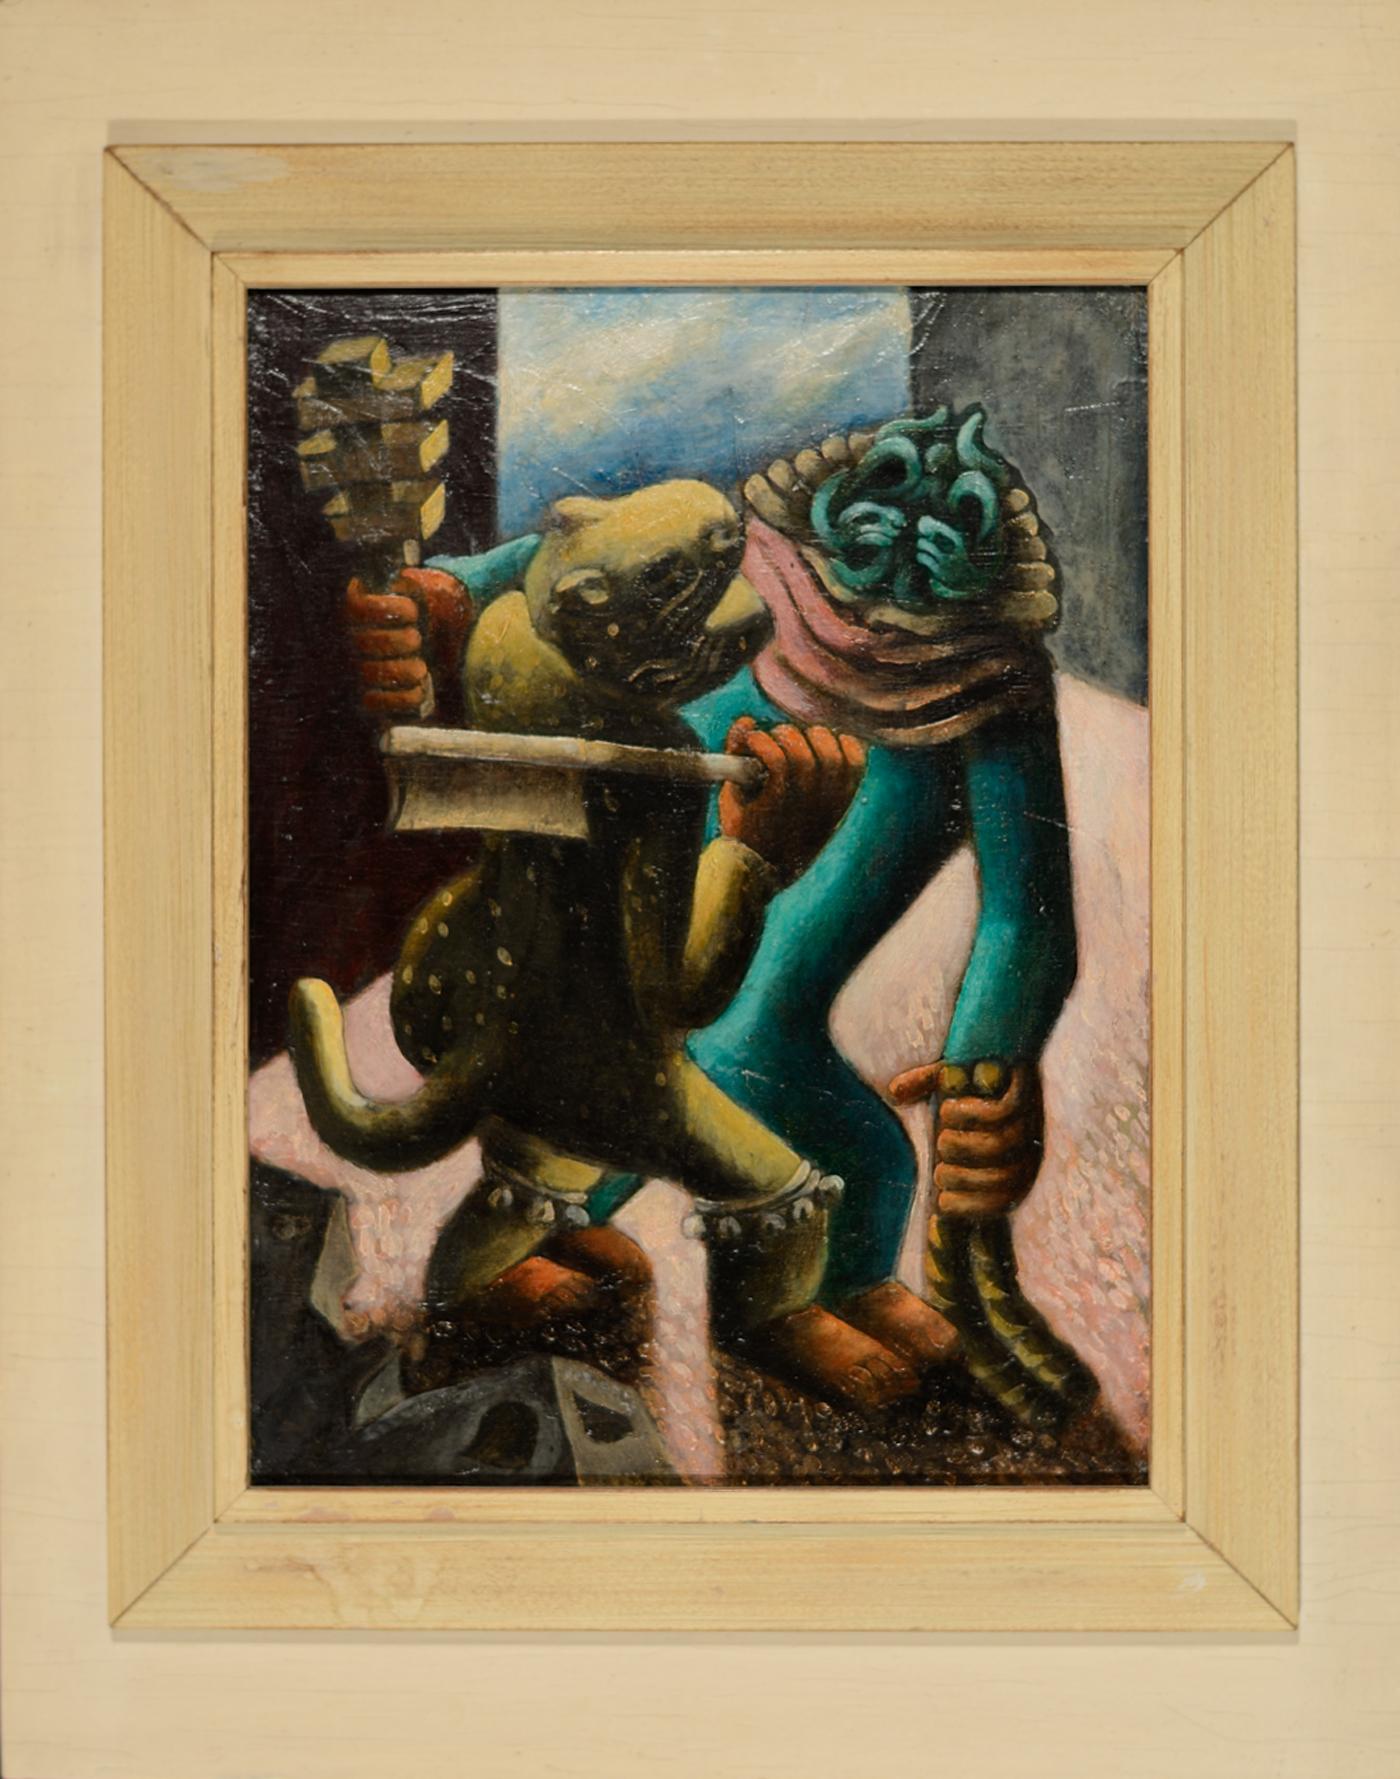 Tlaloc and the Tiger (1939)
Oil on panel
16" x 12"
23 ¾" x 18 ¾"x 2 ½" framed
Signed and dated (and inscribed) "de Diego 39" lower left.
Provenance: The artist; private collection Chicago; by descent
Exhibited: 2018 The Arts Club of Chicago, "A Home